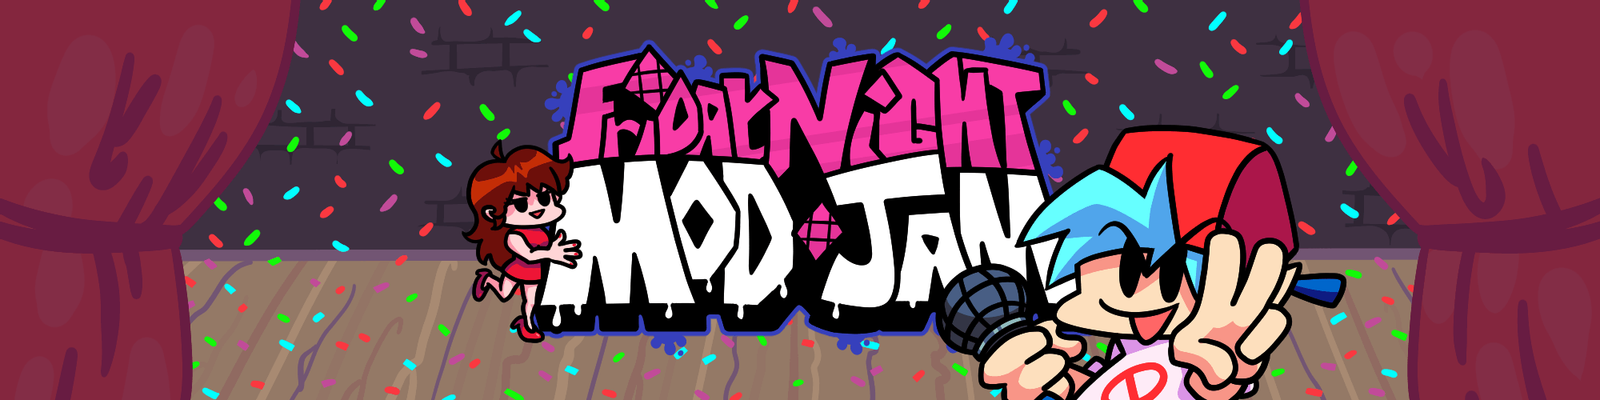 Game Jolt on X: Get ready! The @YoYoGames & @opera game jam starts soon!  We'll be revealing the surprise theme for the jam in less than 13 hours!  This is your chance